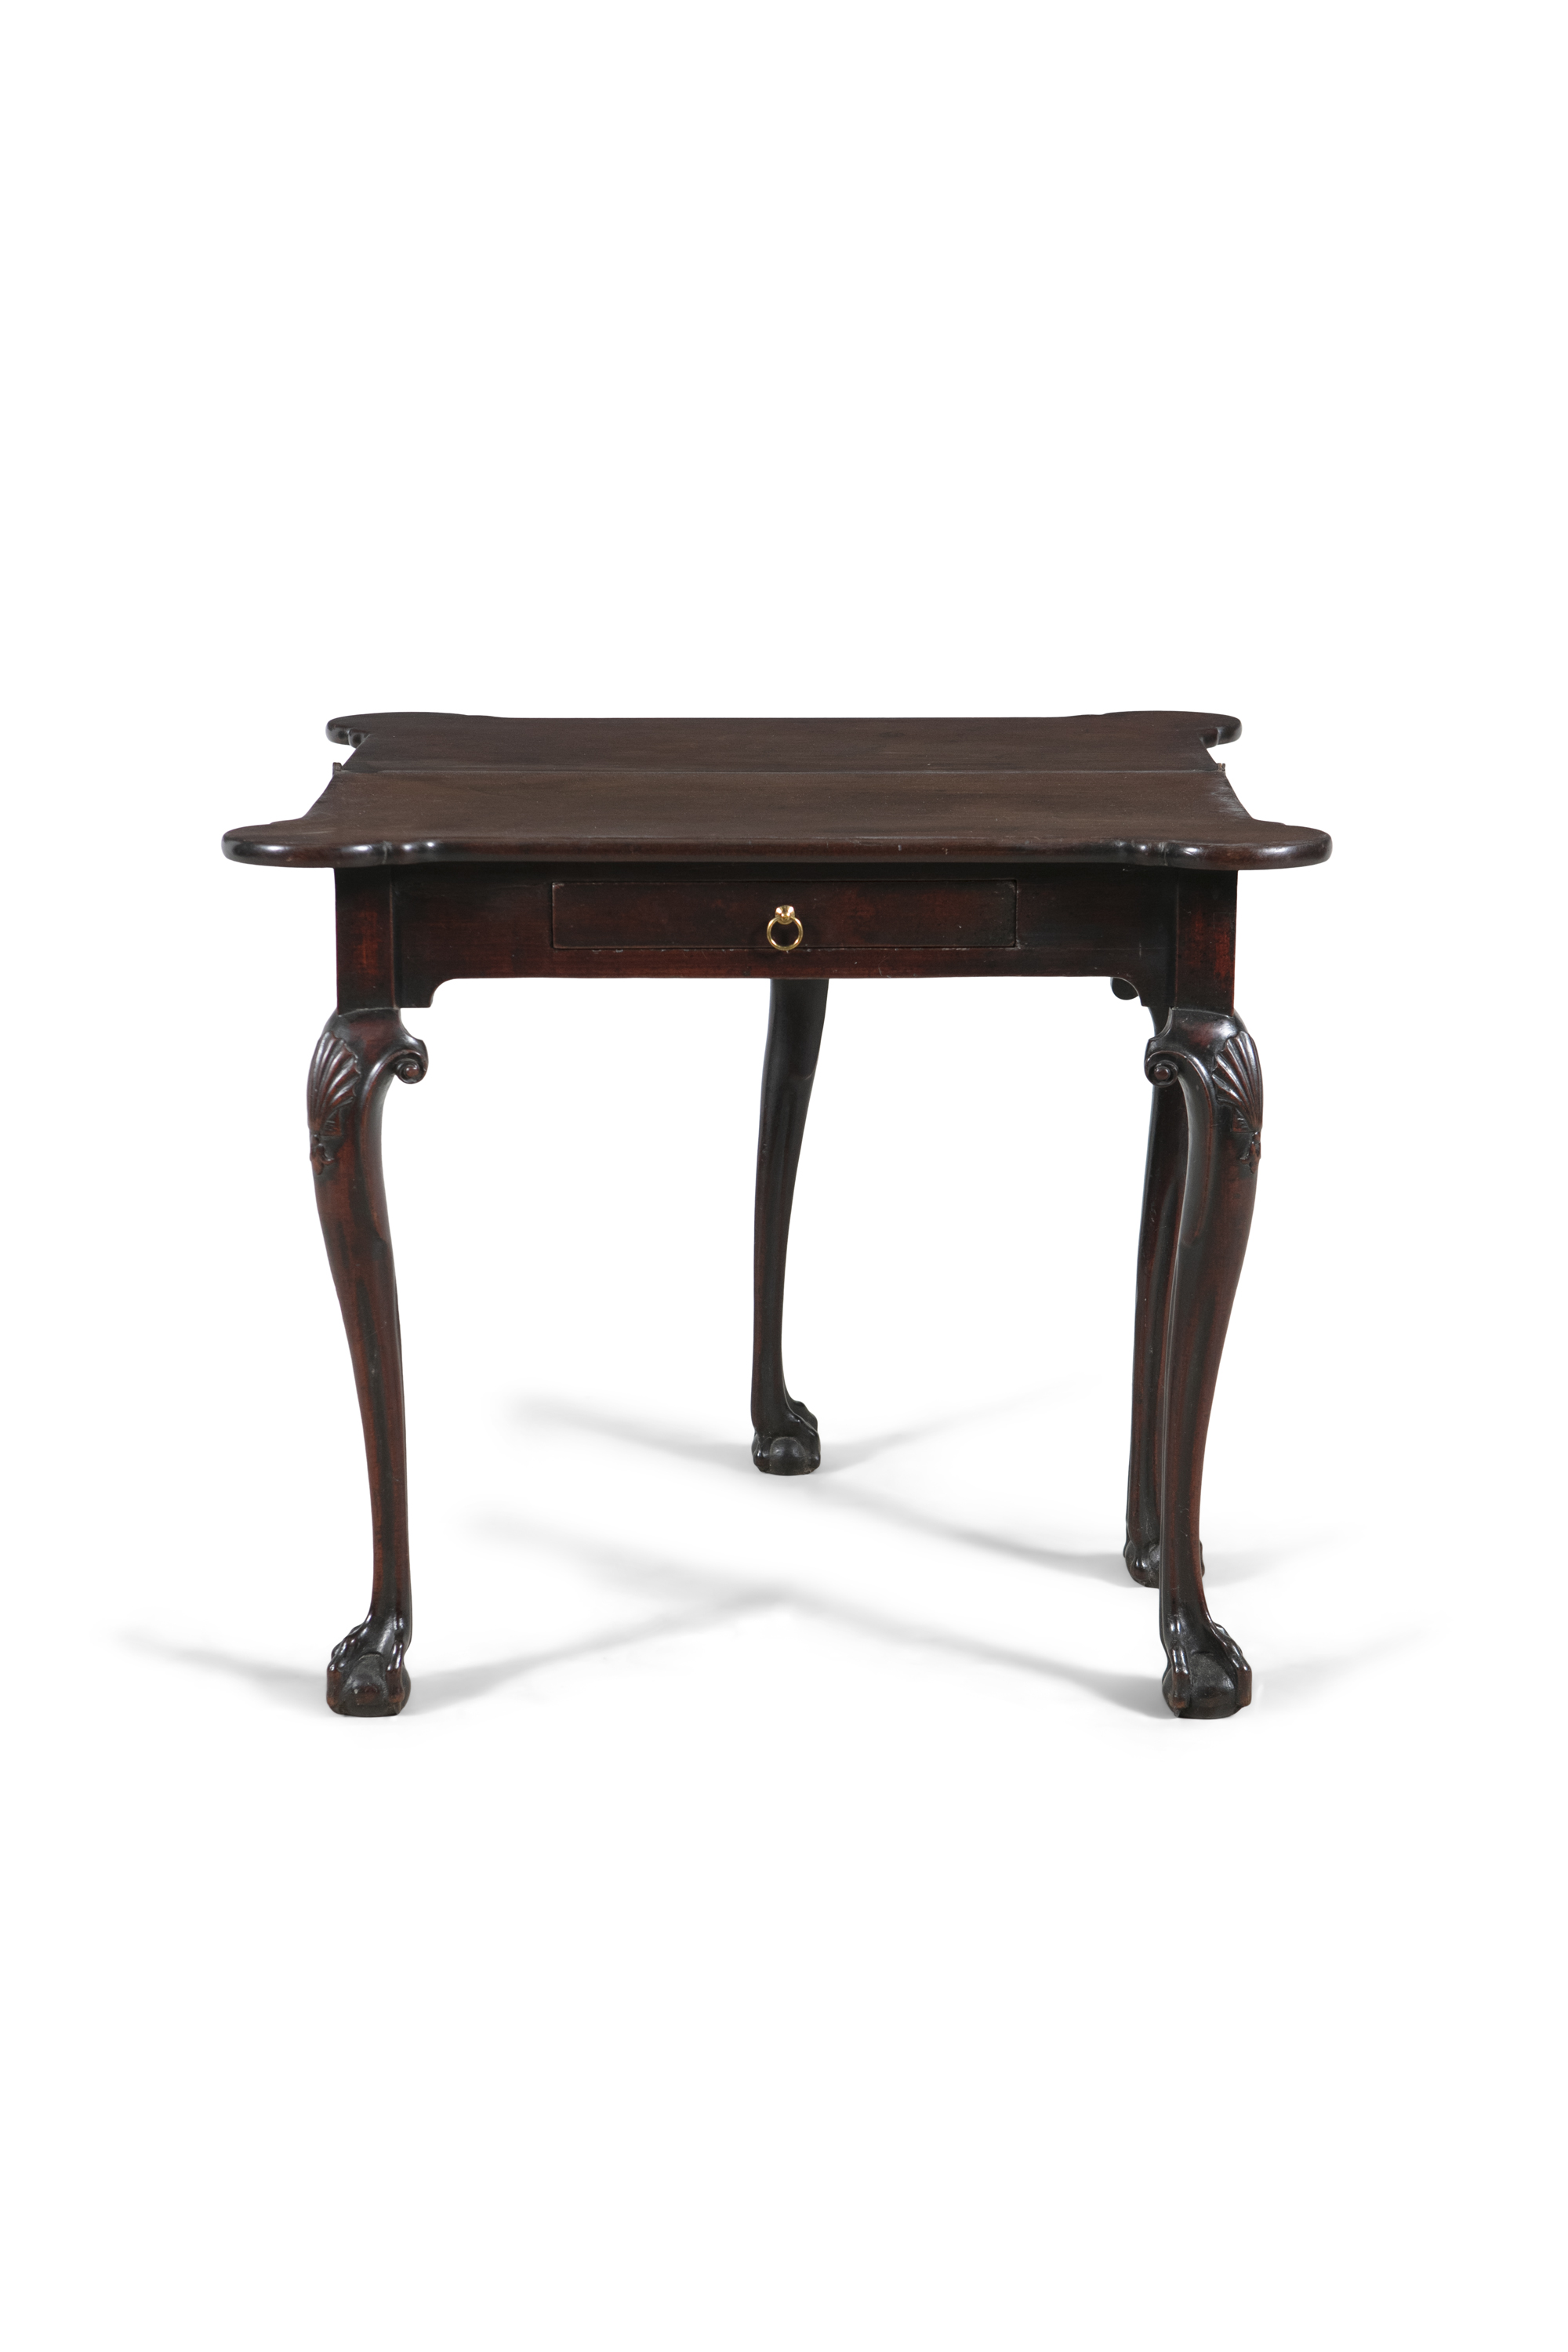 AN IRISH GEORGE III MAHOGANY FOLDING TOP TEA TABLE, with rounded candle stands, with single frieze - Image 3 of 3